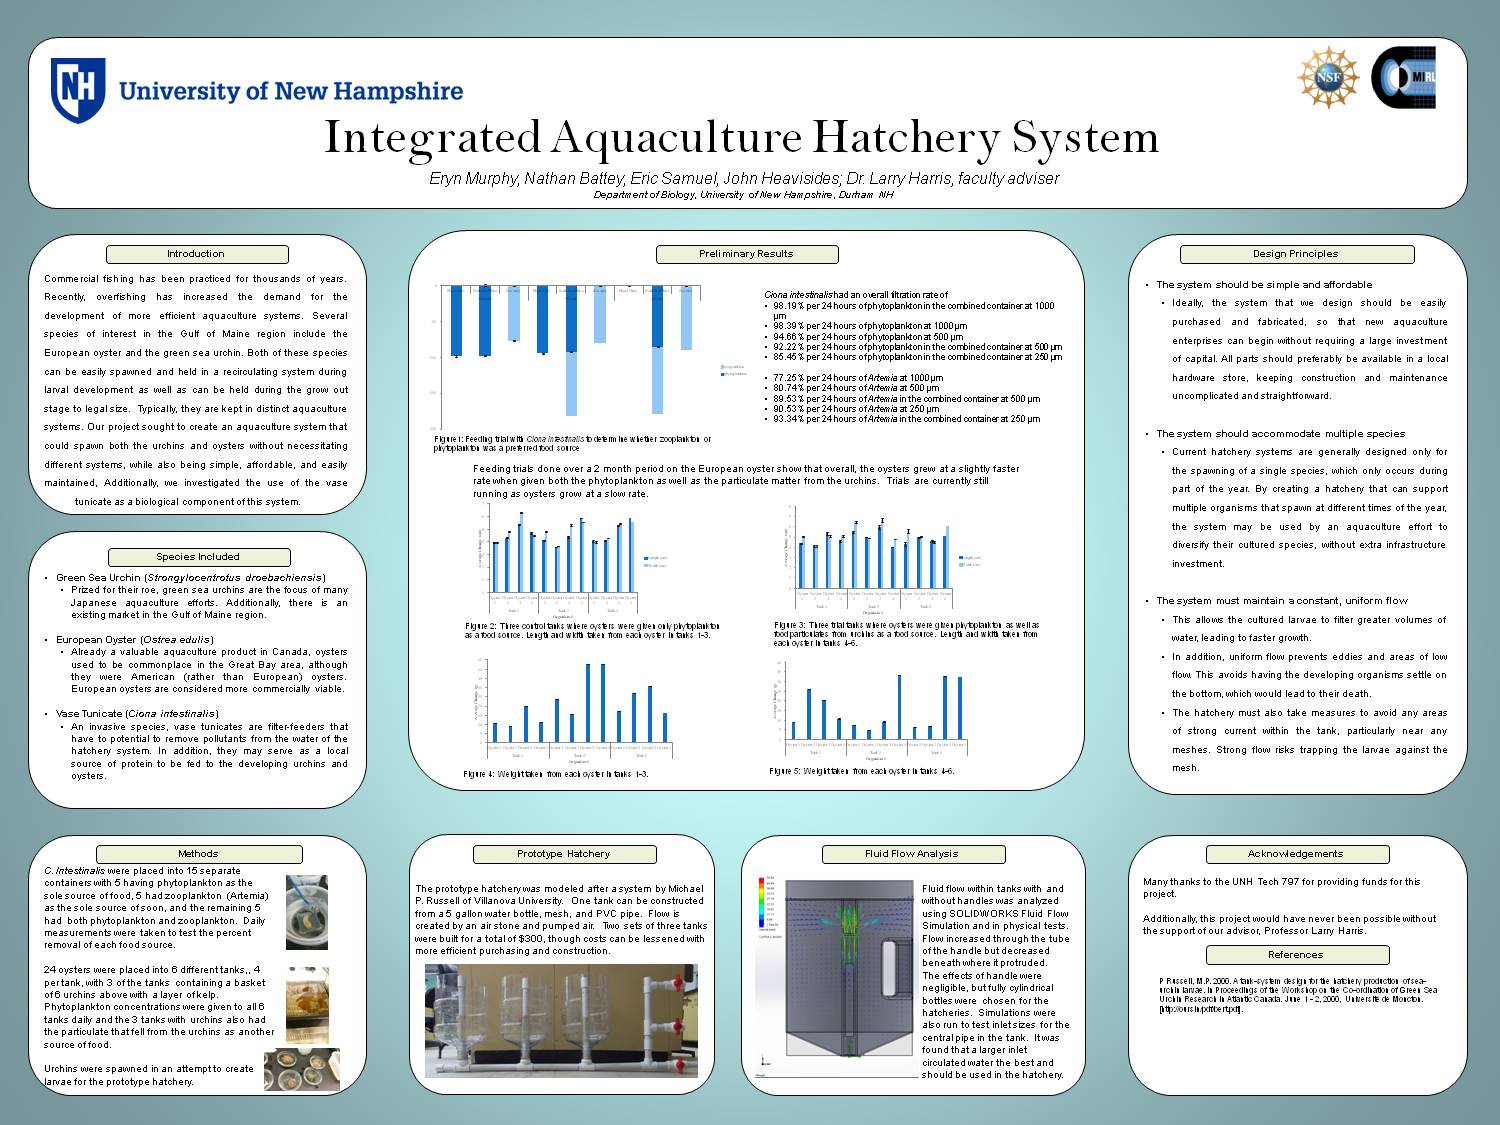 Integrated Aquaculture Hatchery System by jheavisides